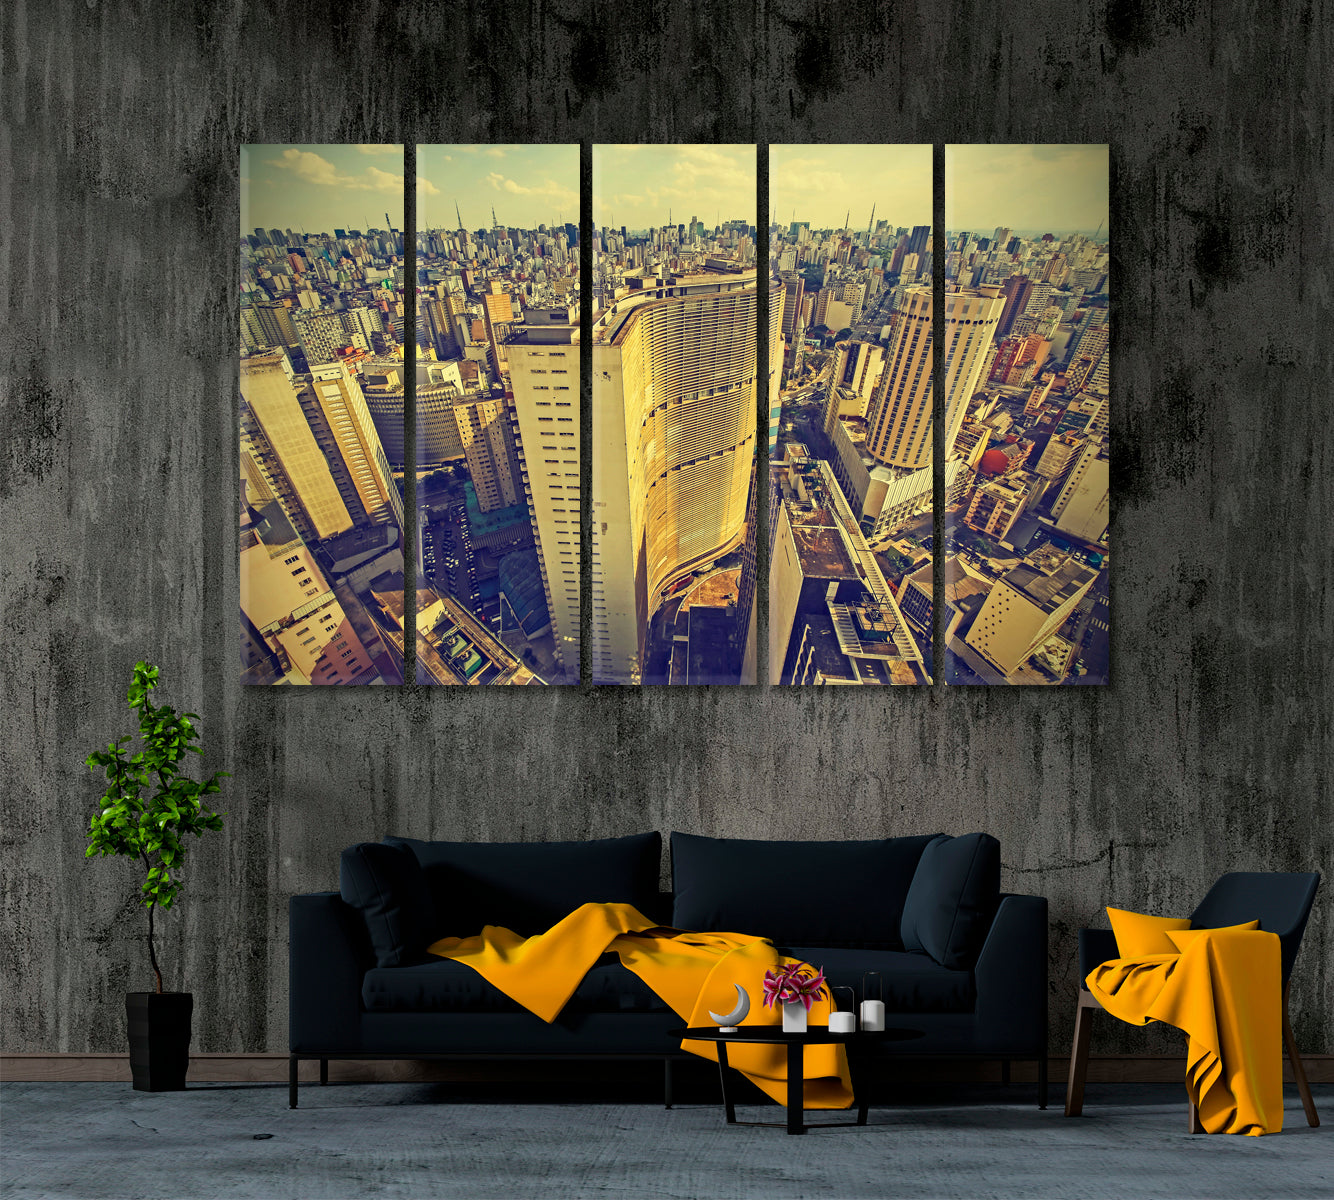 Sao Paulo Downtown Brazil Canvas Print ArtLexy 5 Panels 36"x24" inches 